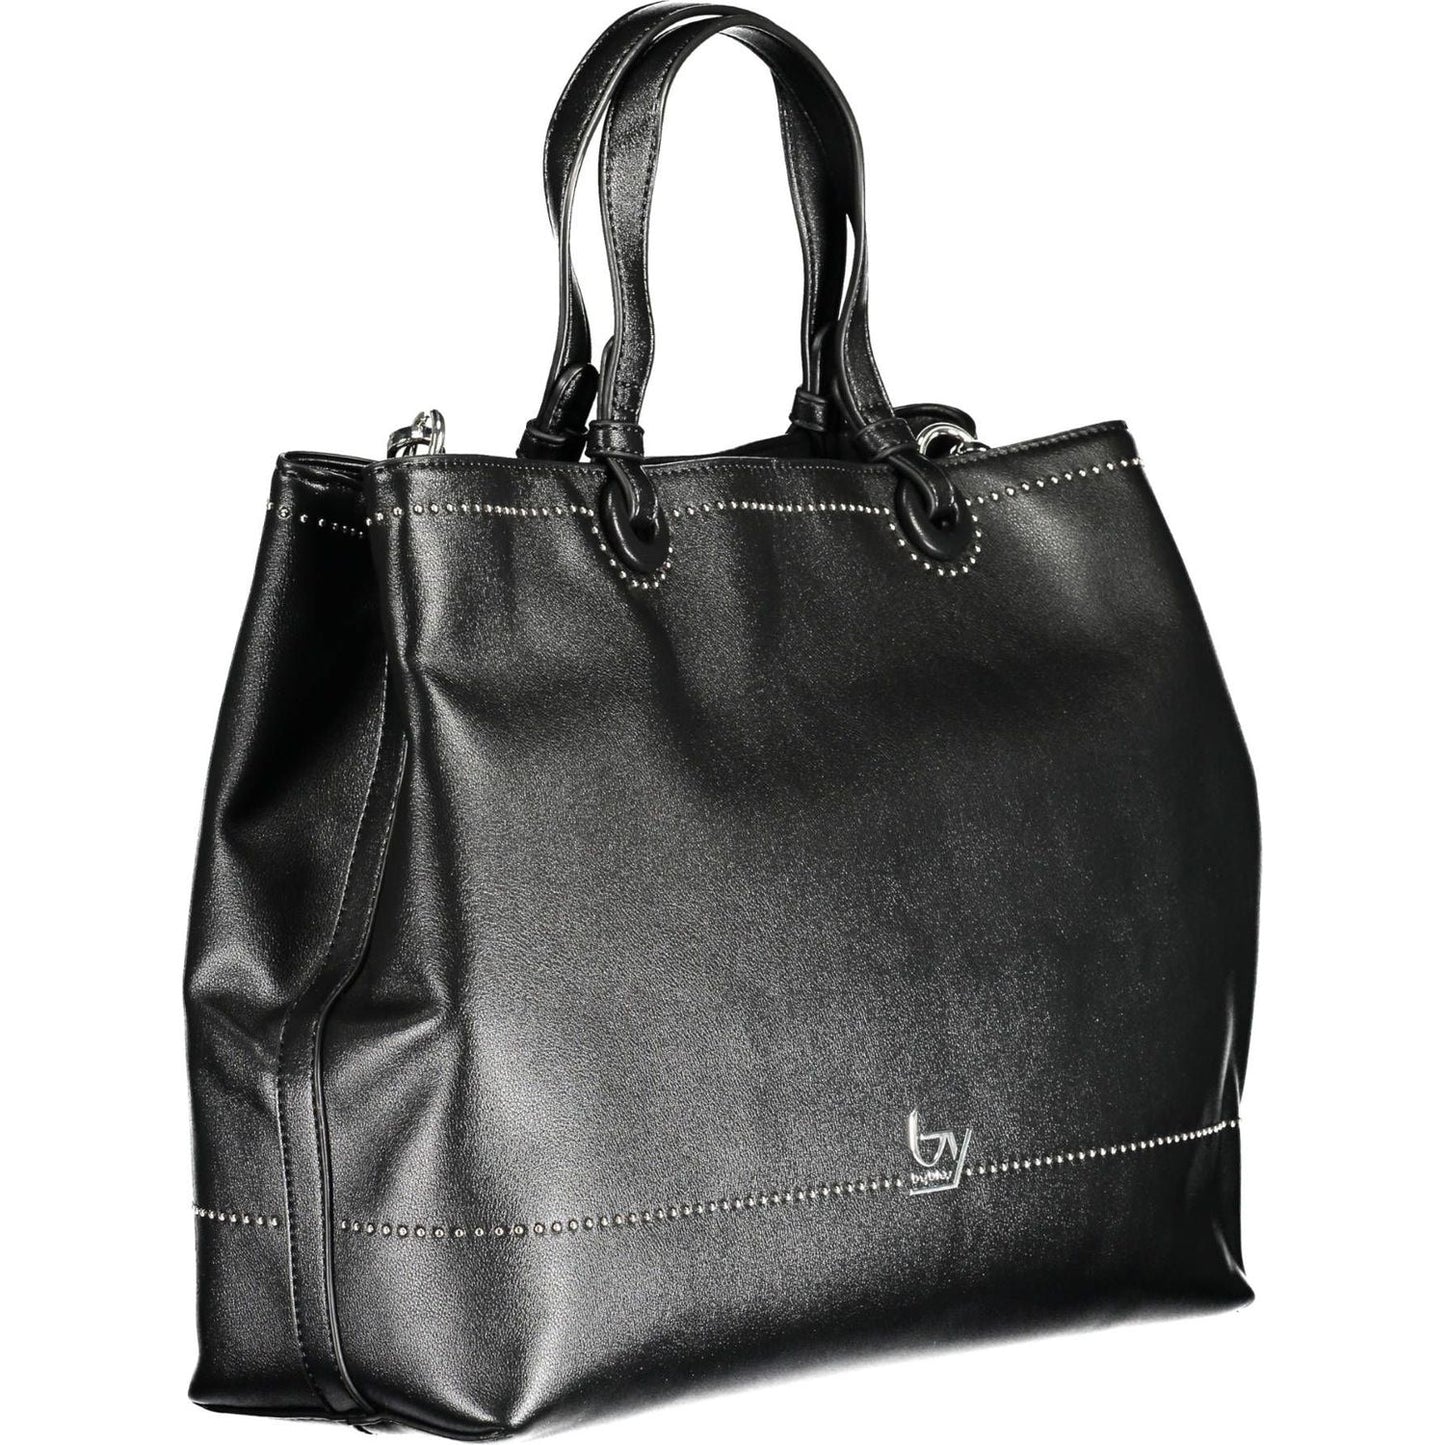 BYBLOS Chic Two-Handle City Bag with Contrast Detail chic-two-handle-city-bag-with-contrast-detail